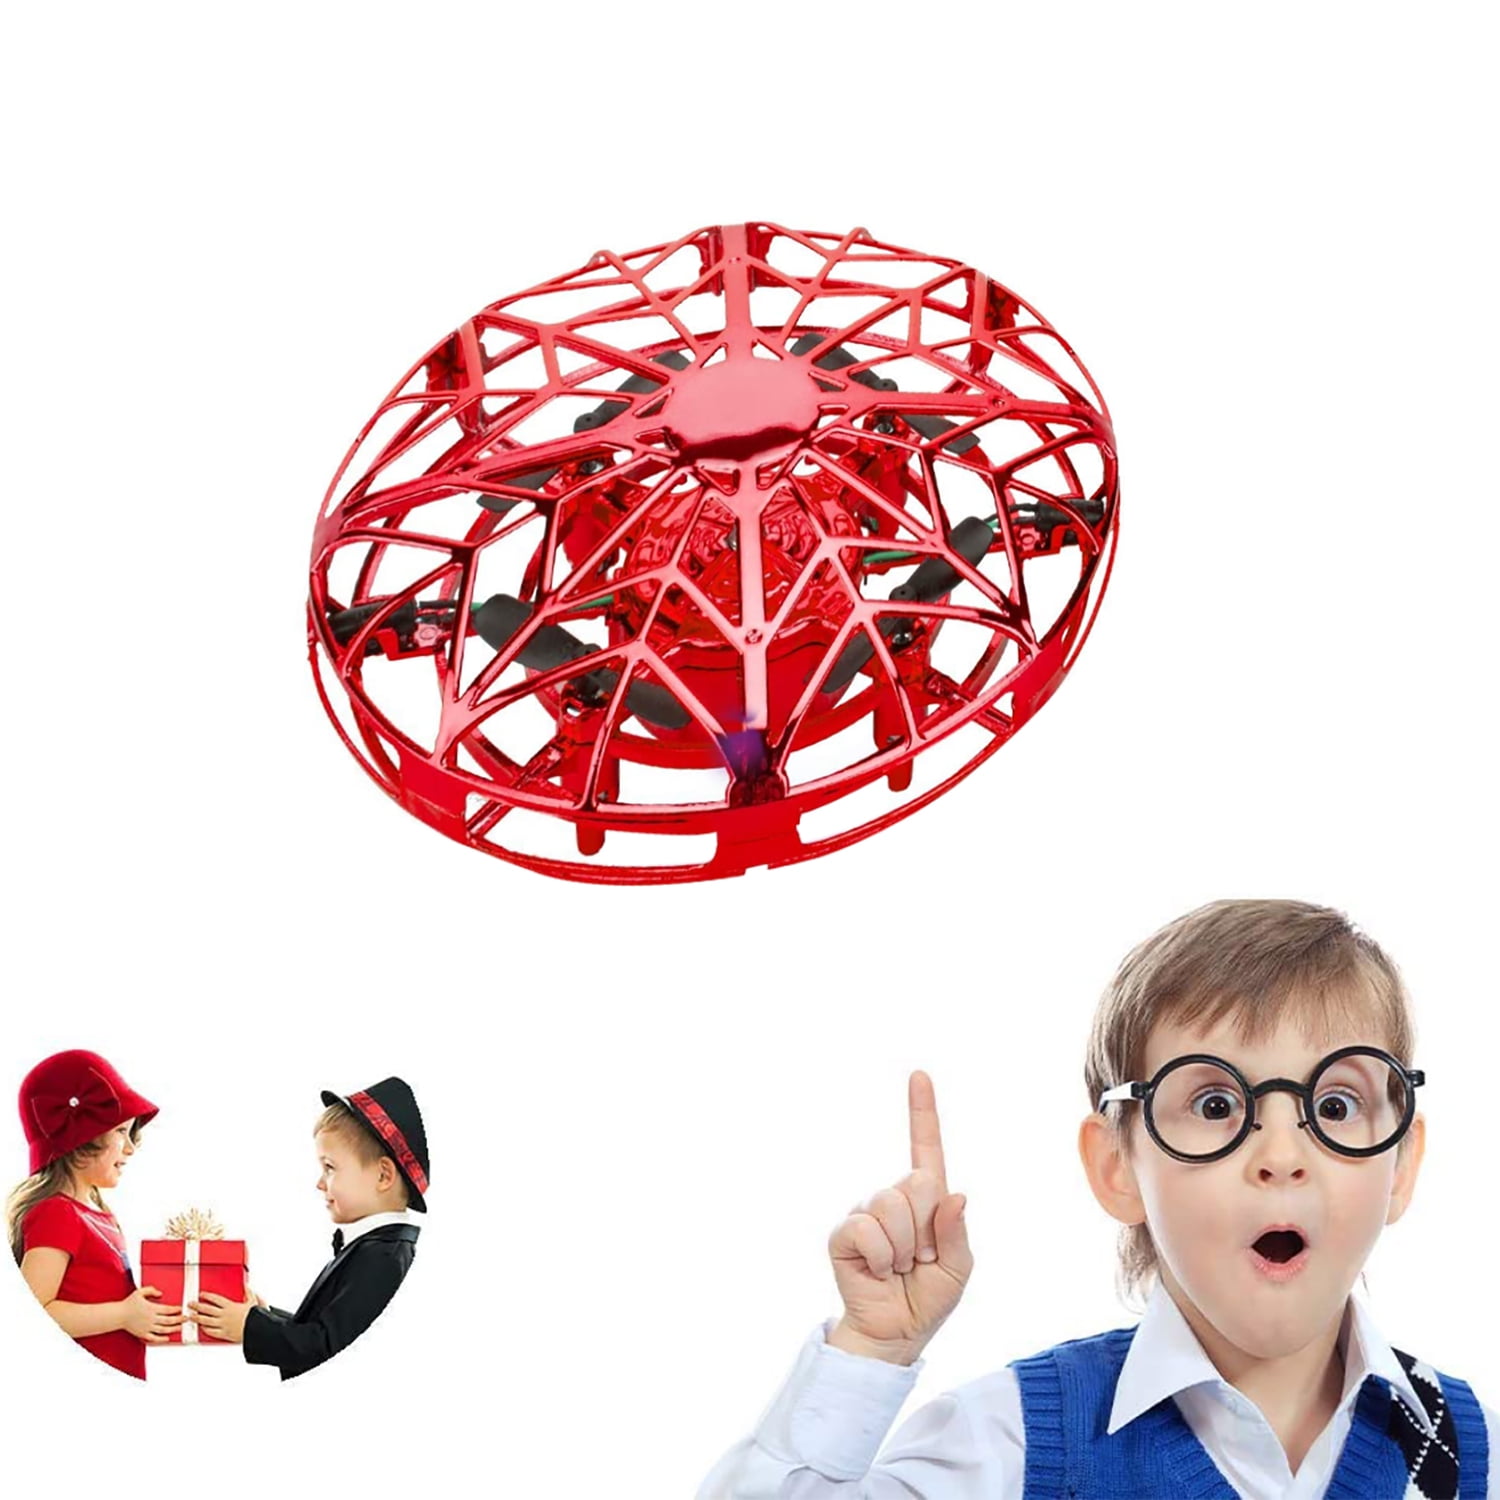 Taipow Flying Toy UFO Drone for Kids Hand Operated Mini Drone Helicopter Gift for Boy or Girl 360° Rotating Quadcopter Toy with LED Lights for Indoor and Outdoor